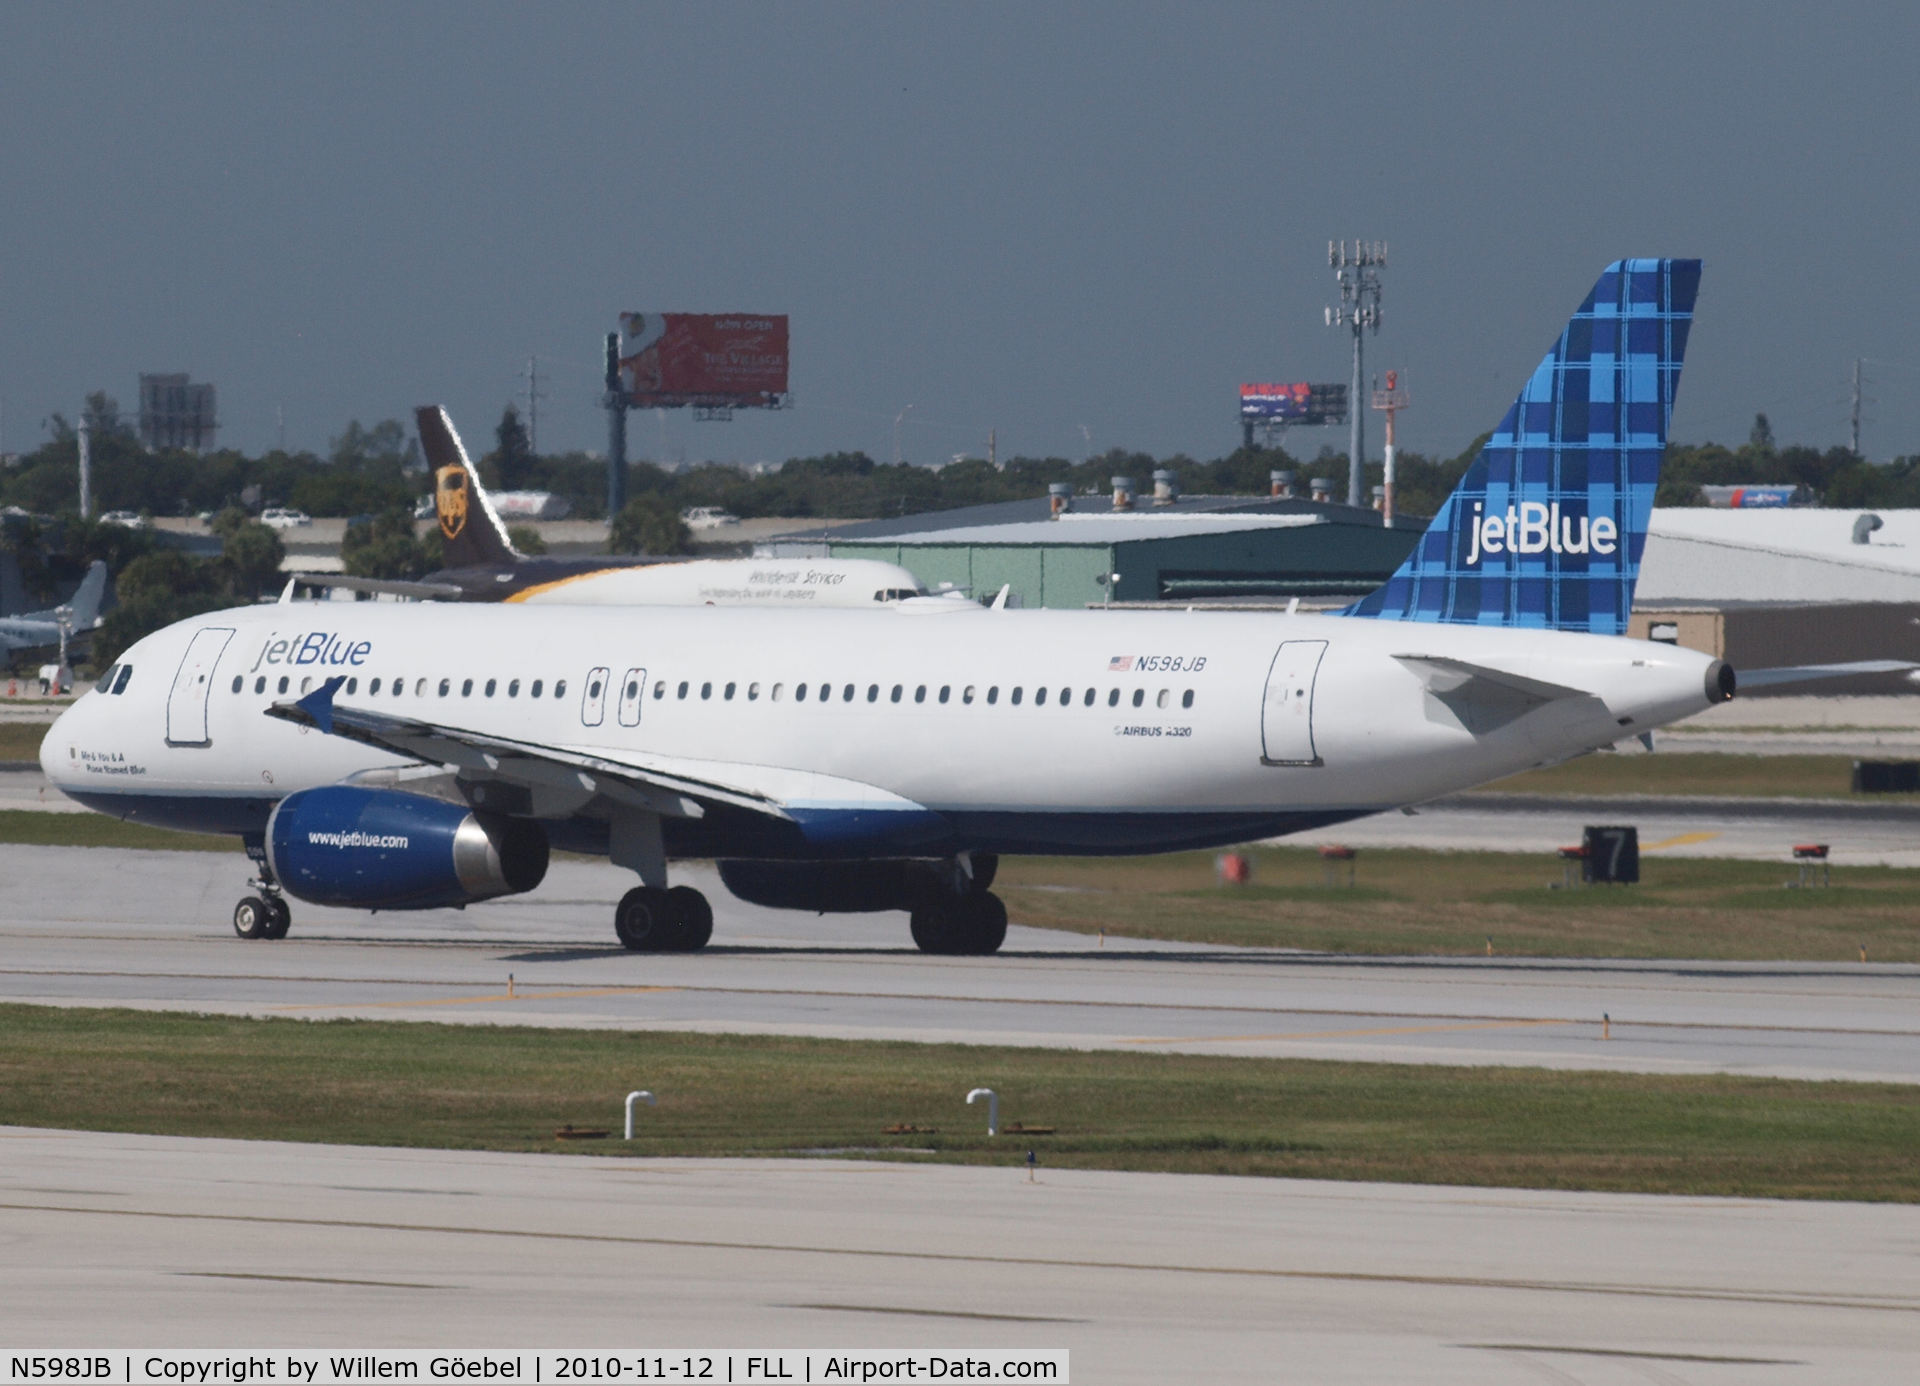 N598JB, 2004 Airbus A320-232 C/N 2314, Taxi to the gate of FLL airport